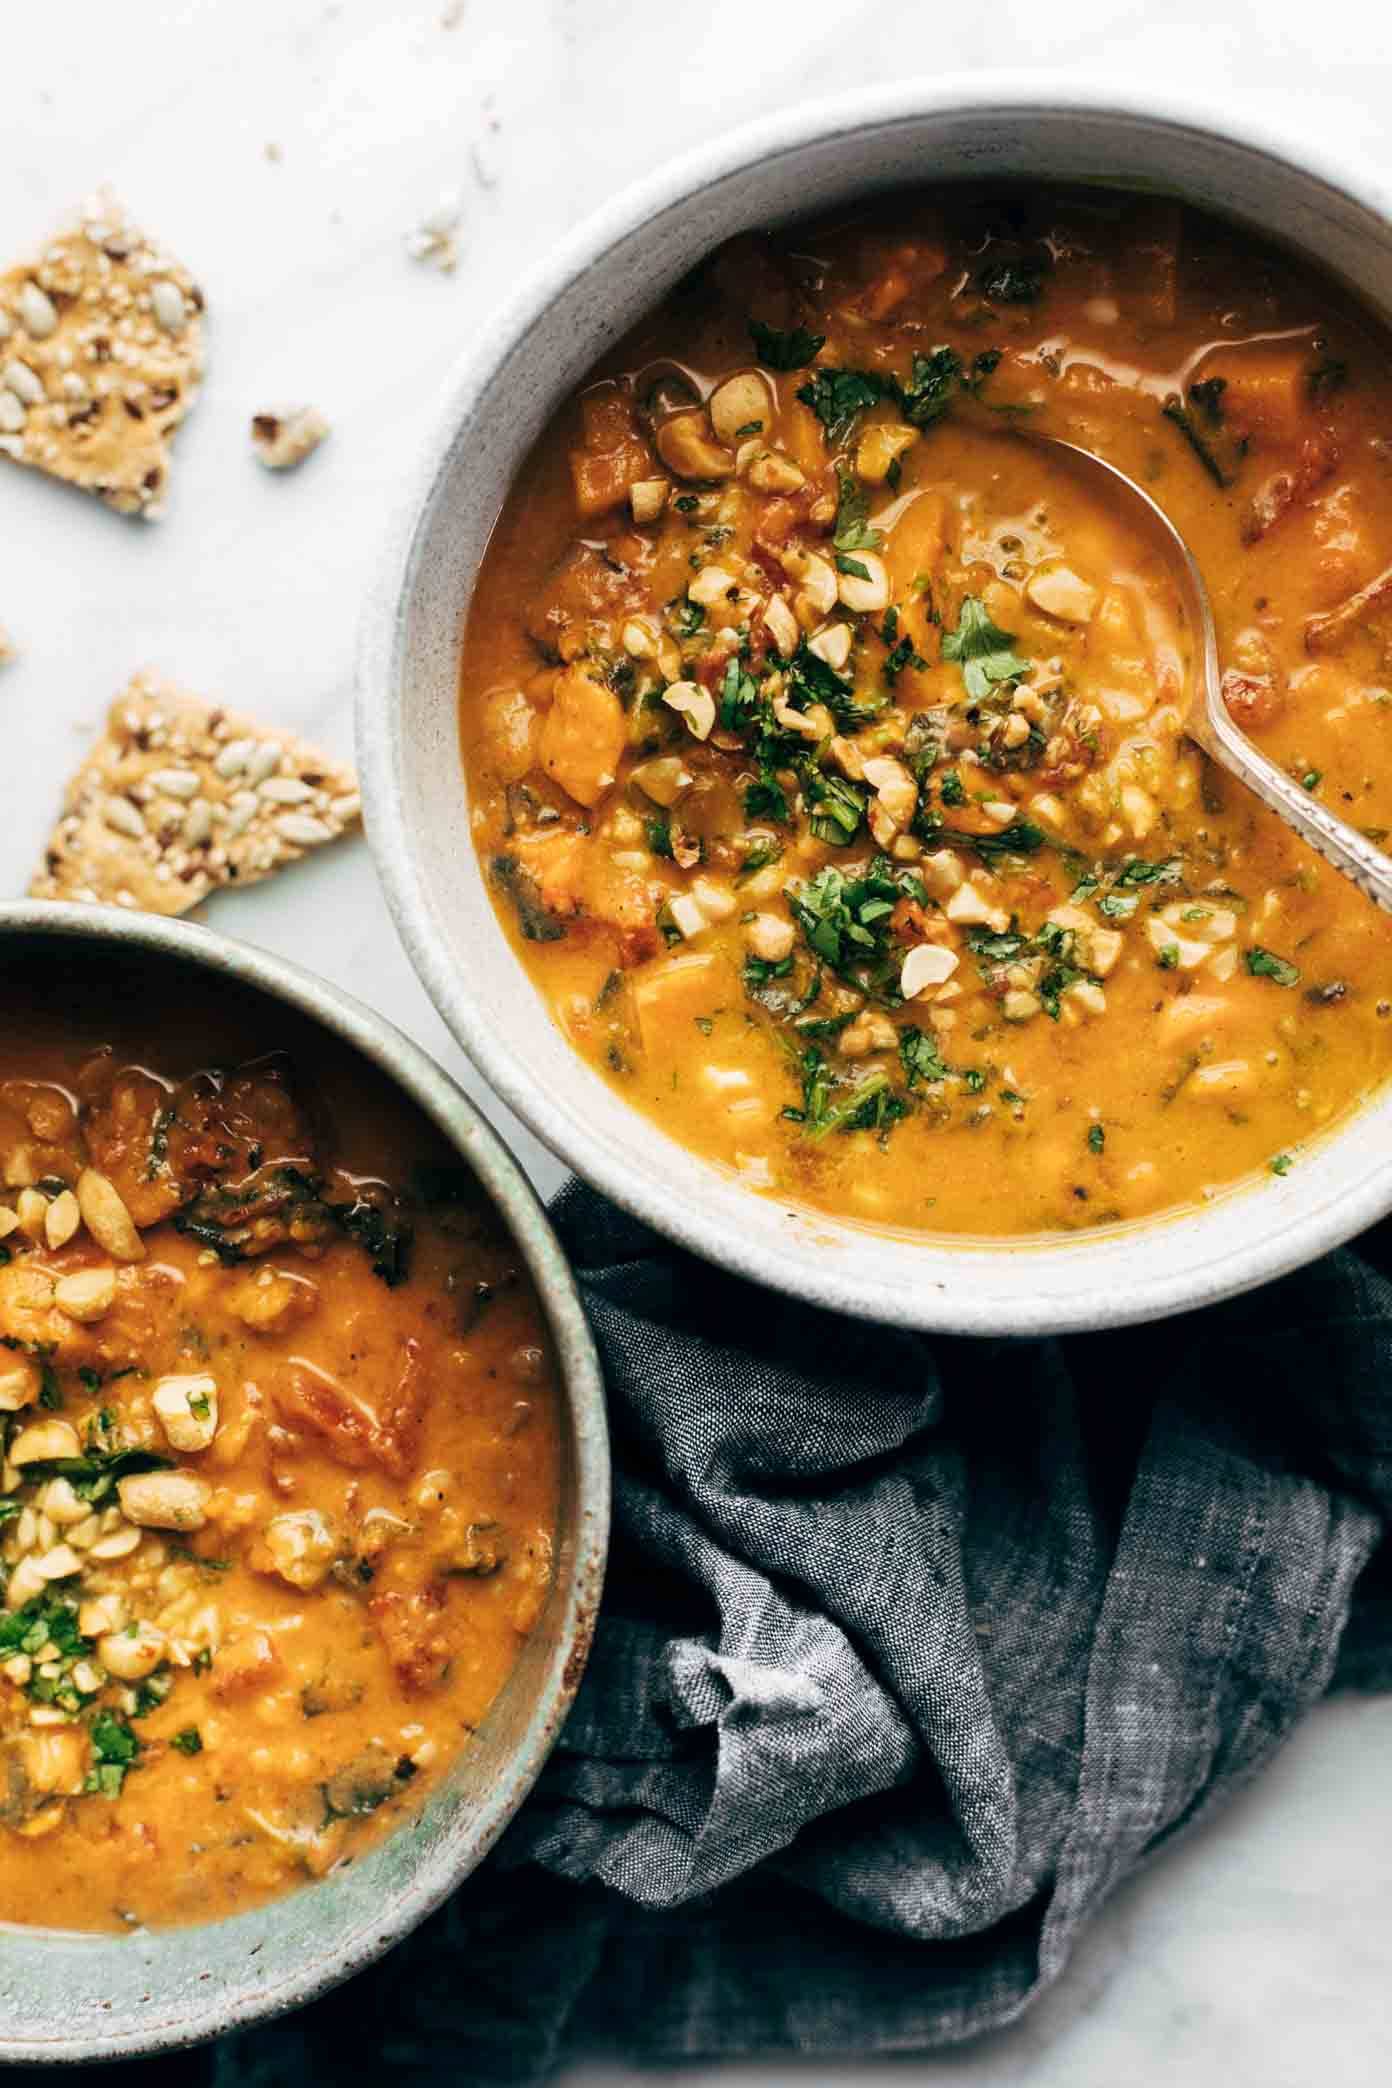 Spicy Peanut Soup with Sweet Potatoes + Kale.